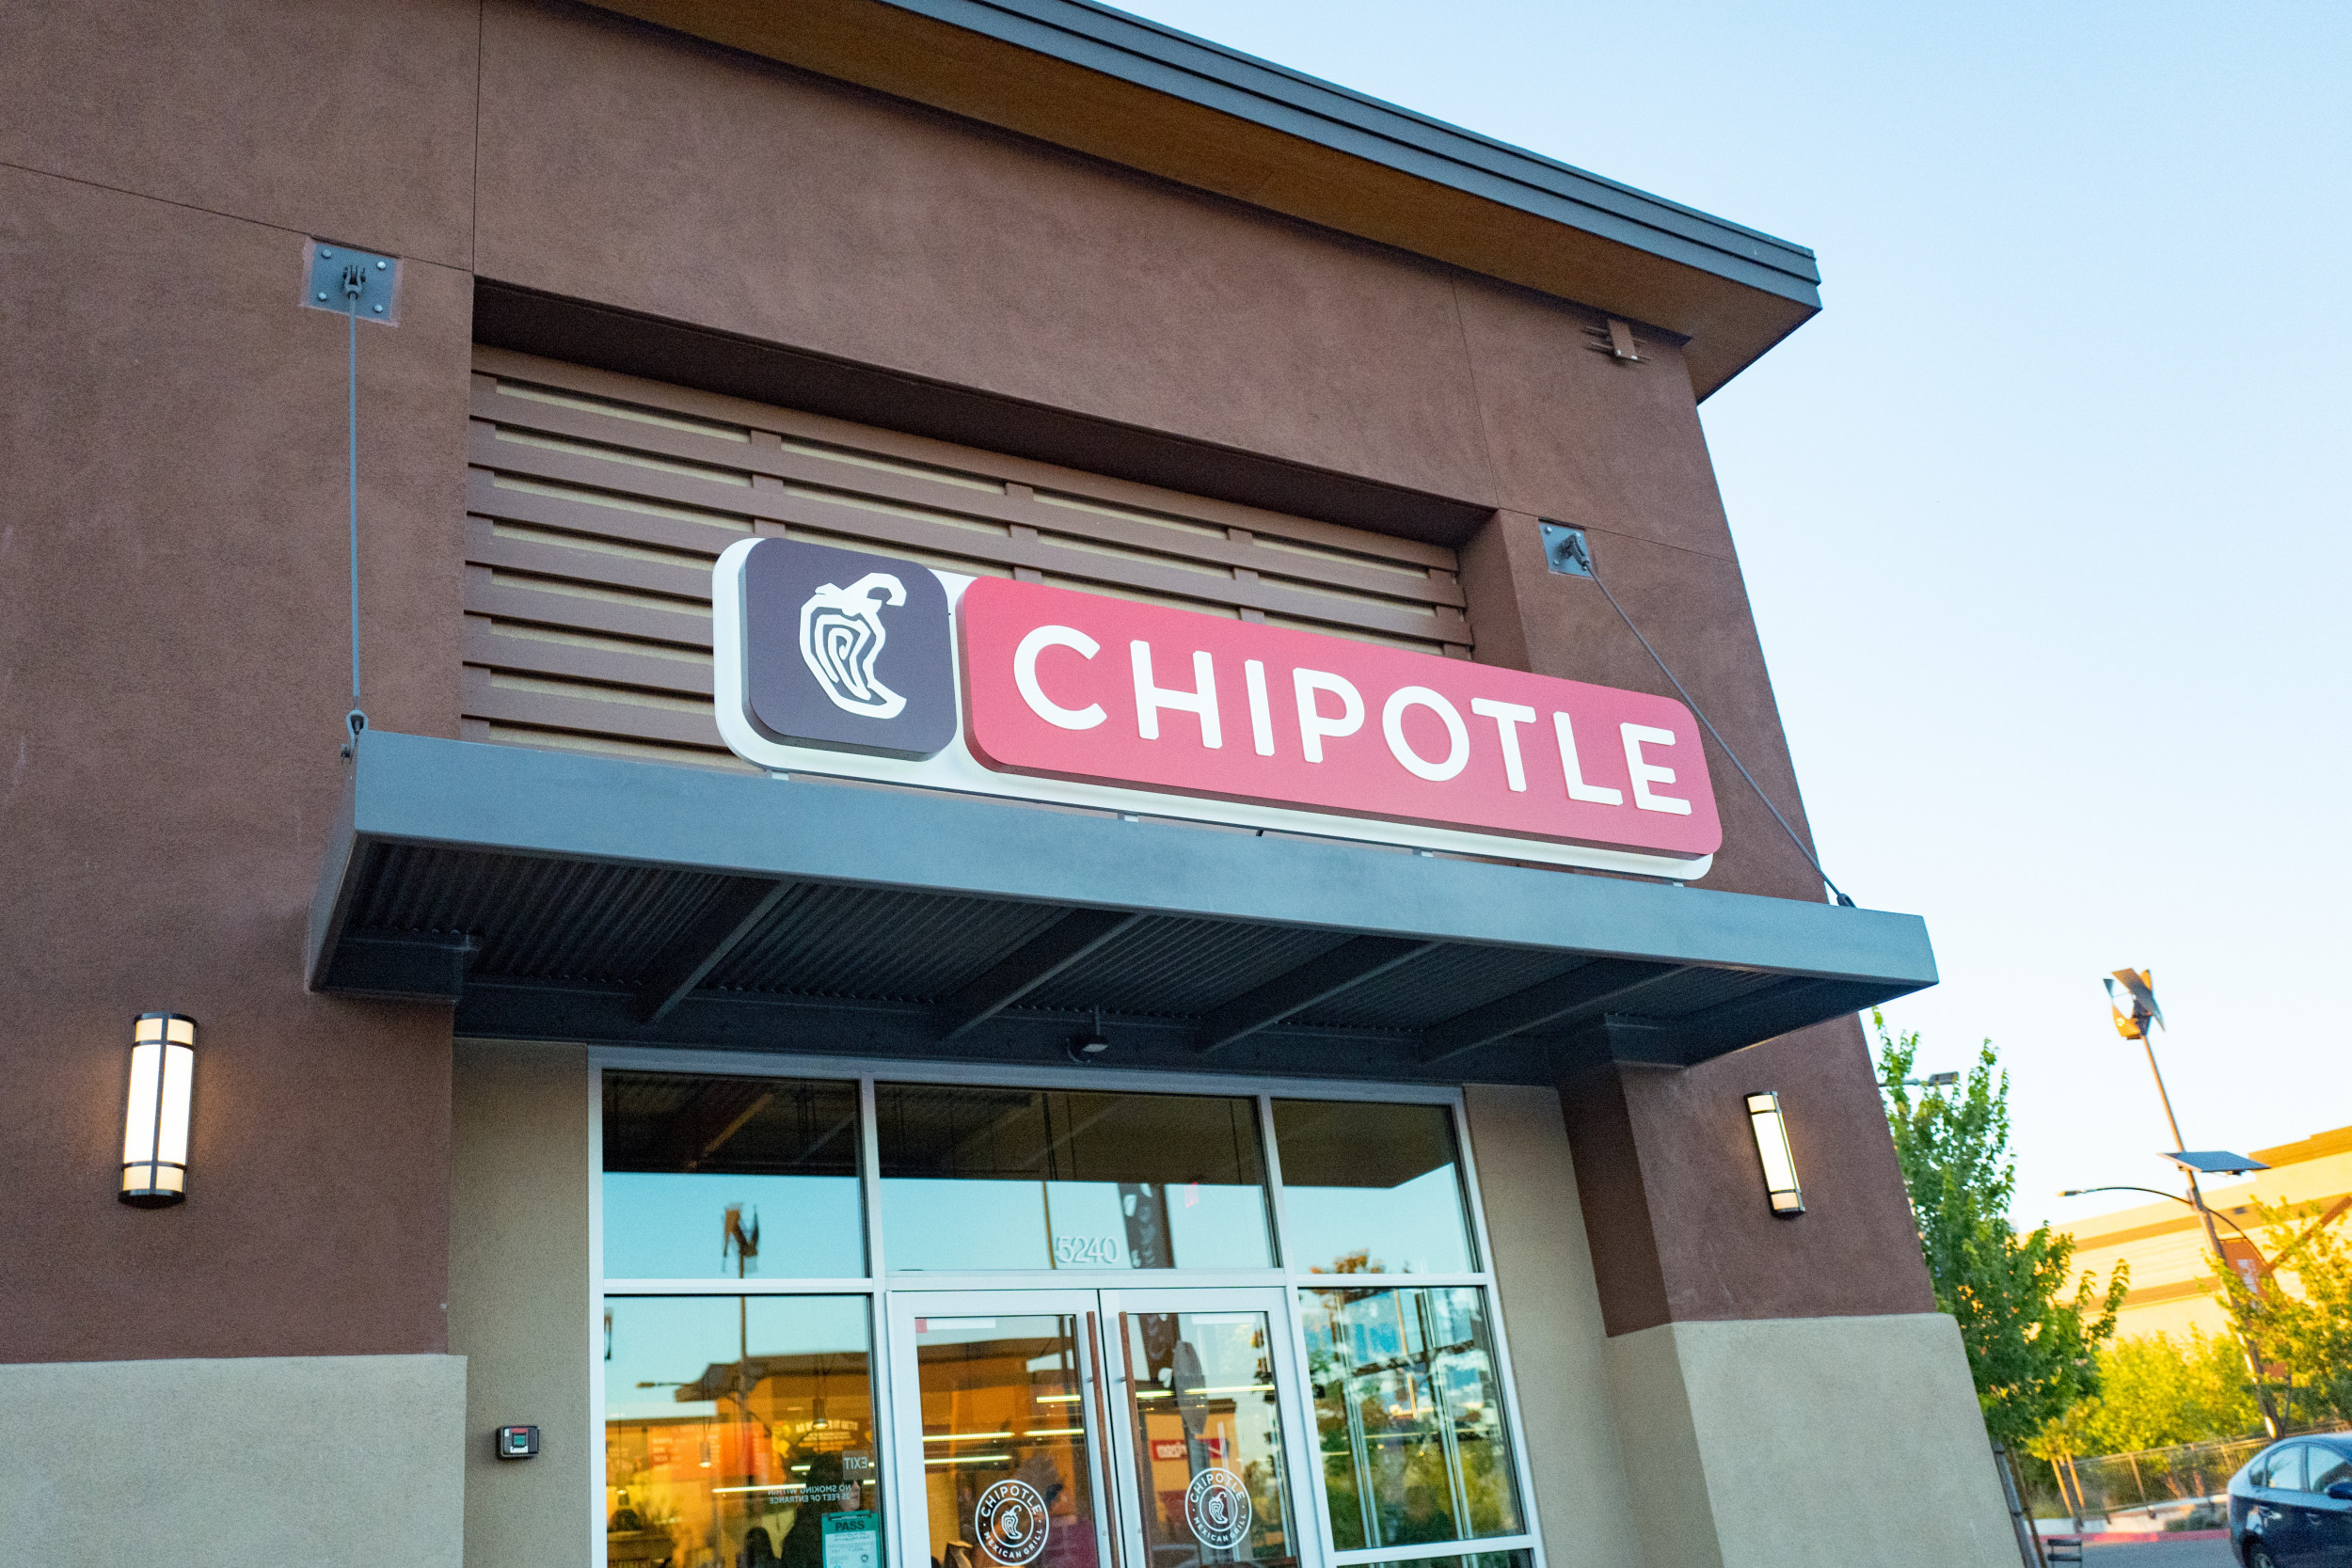 Chipotle's Boorito deal is back for Halloween 2019 this is how to get